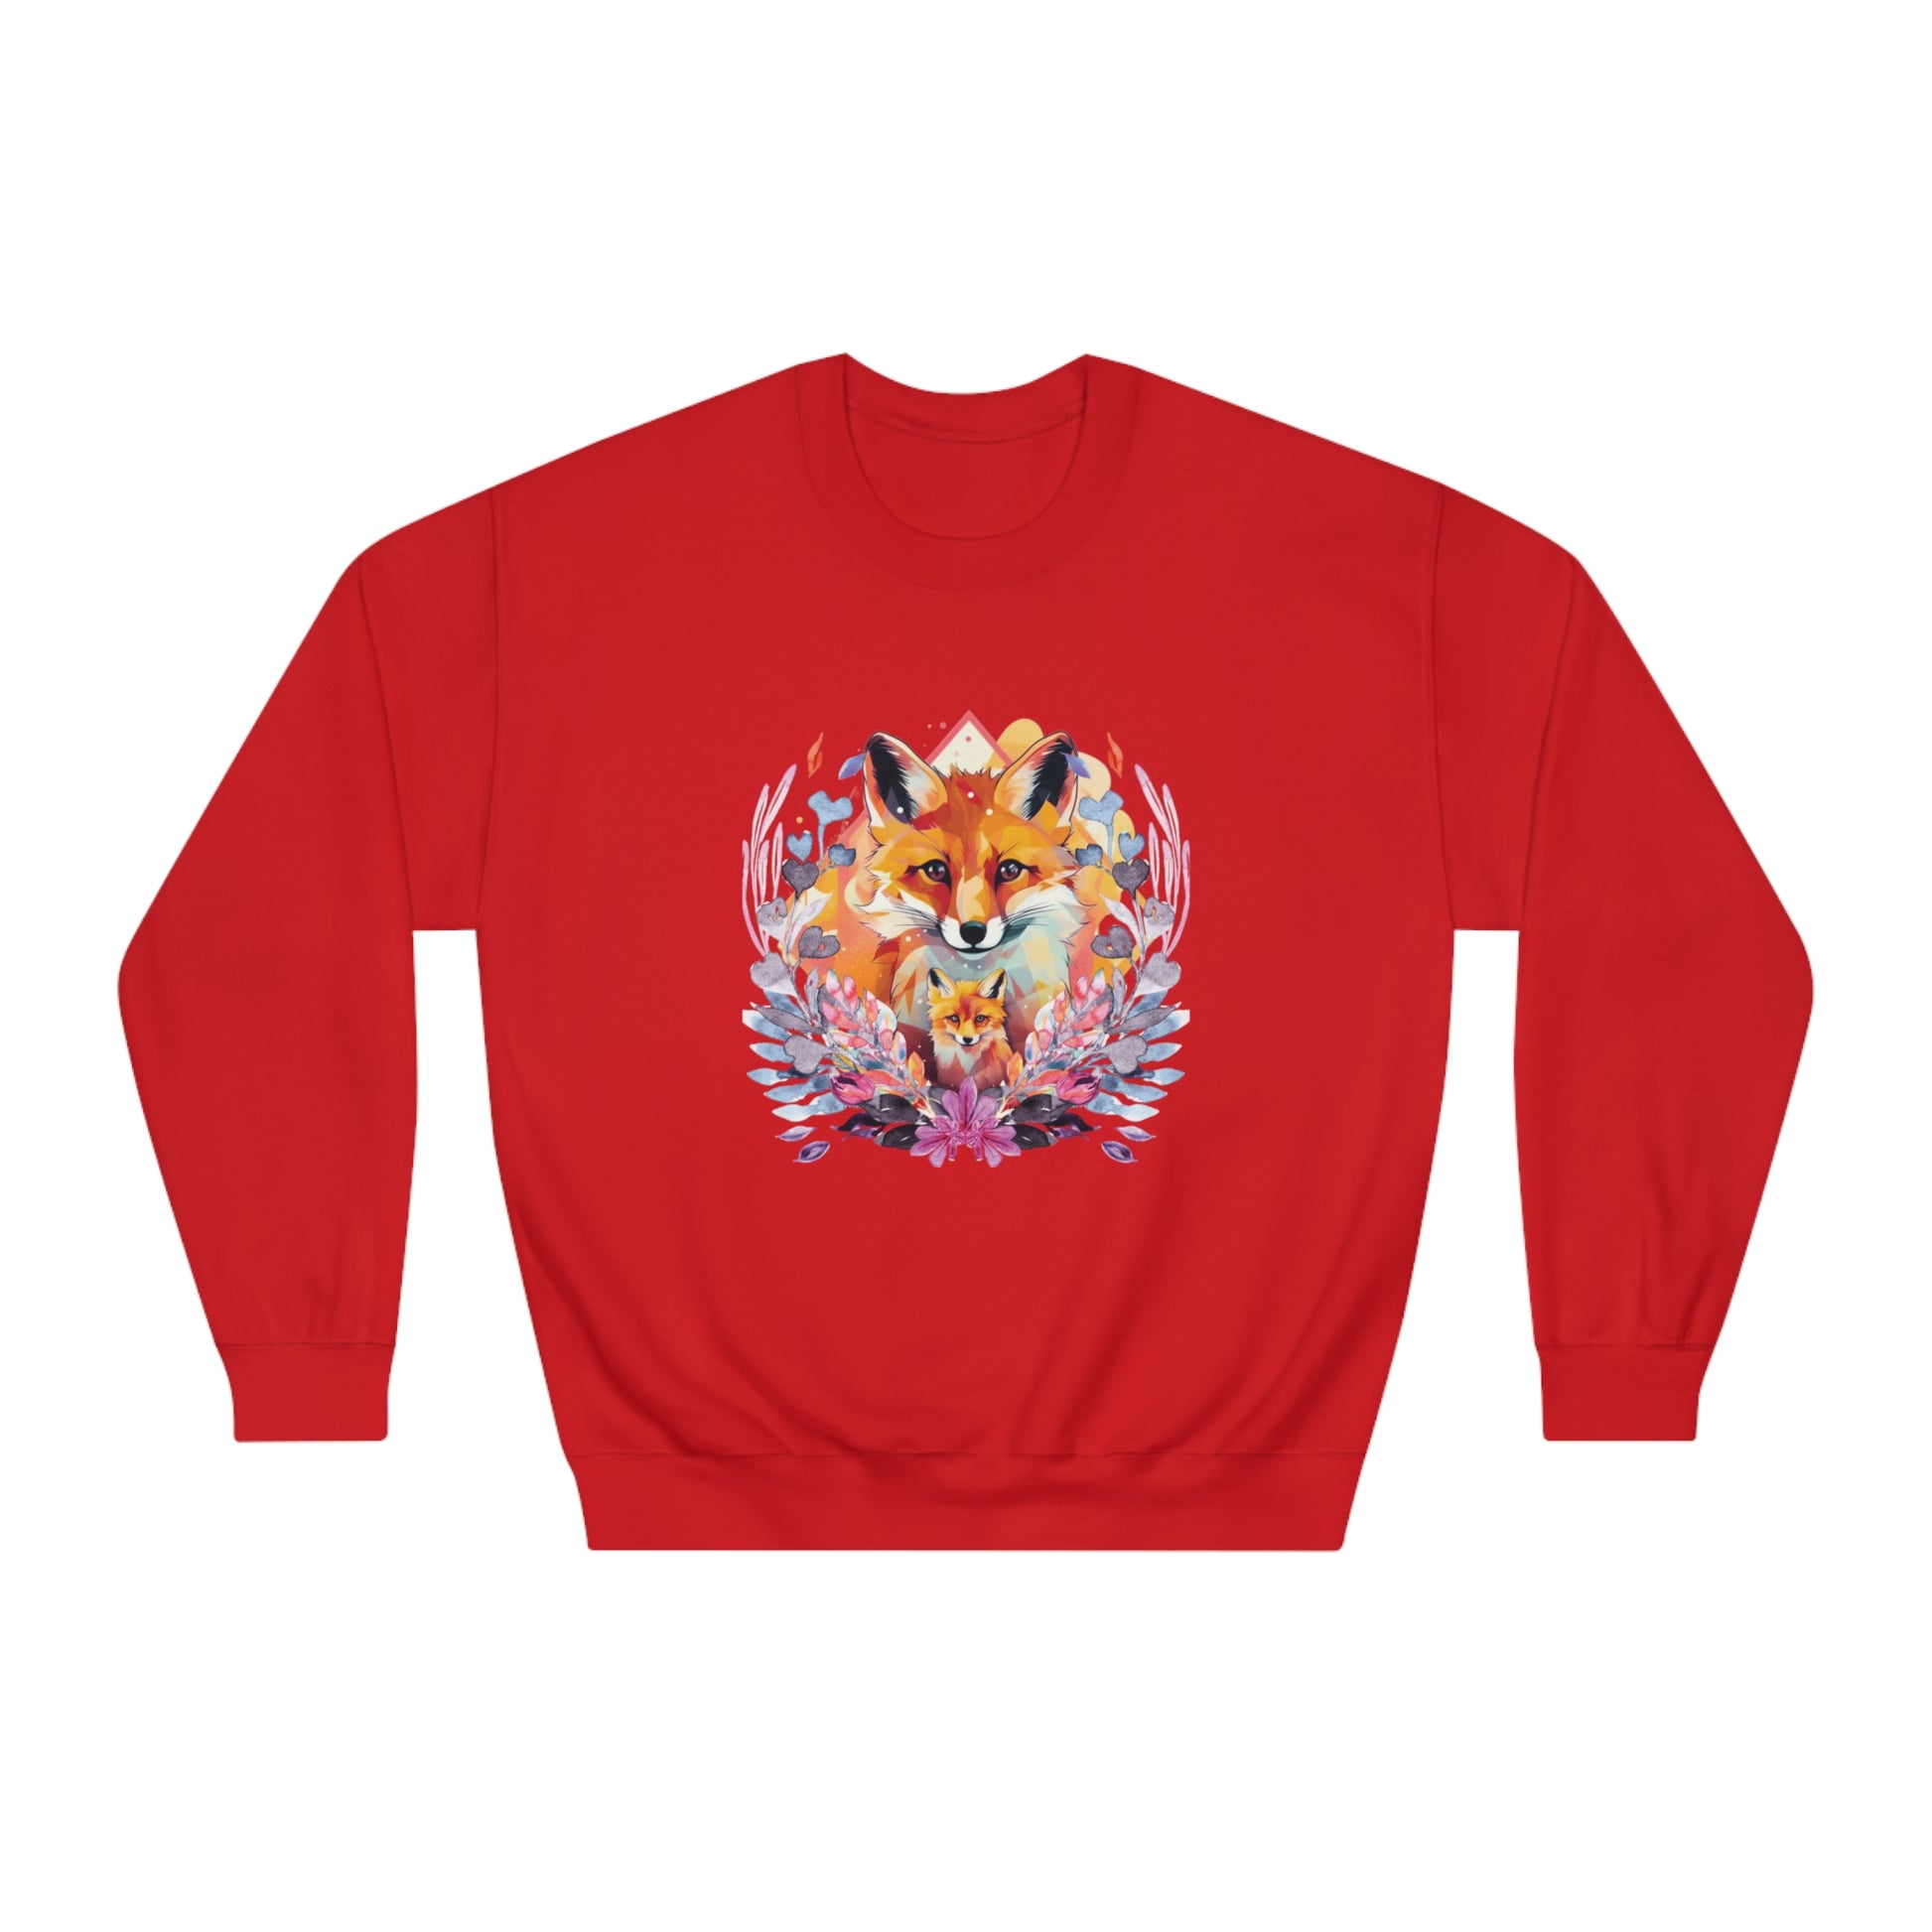 Cozy Cute Fox Cottagecore Sweatshirt | Vintage Forest Witch Aesthetic Sweater with Mommy and Baby Fox Design Sweatshirt   